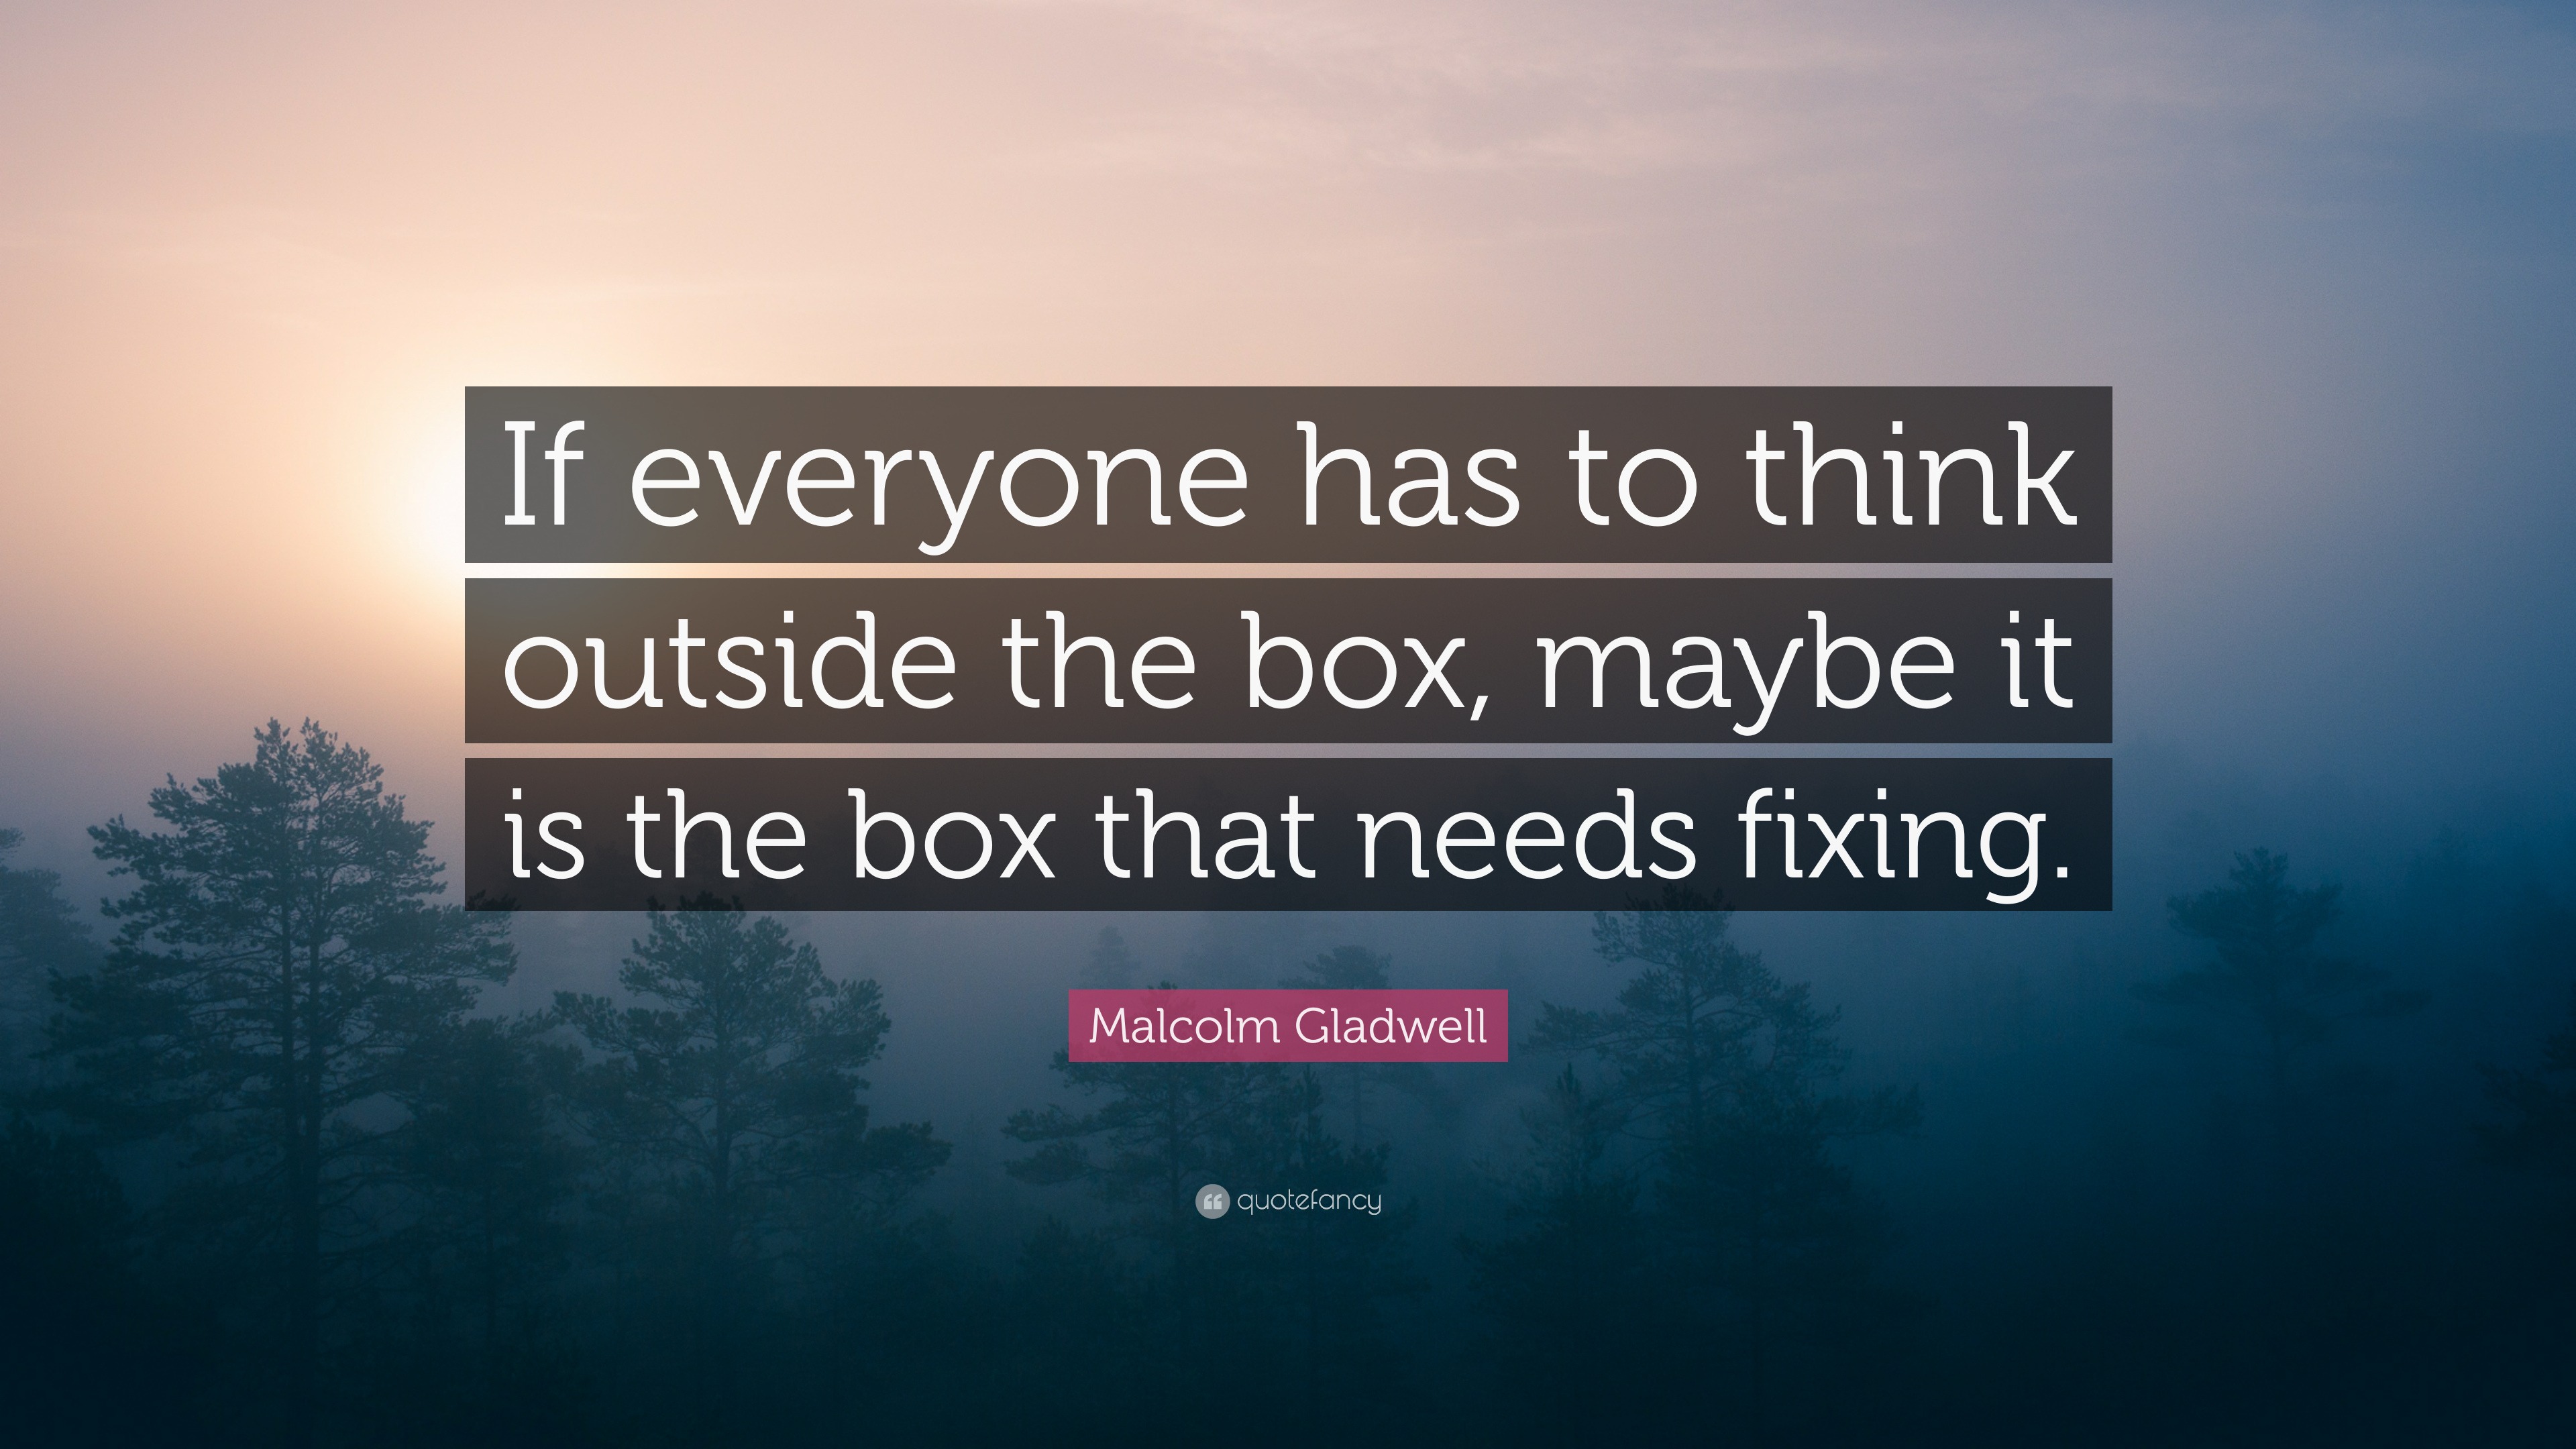 Malcolm Gladwell Quote: “If everyone has to think outside the box